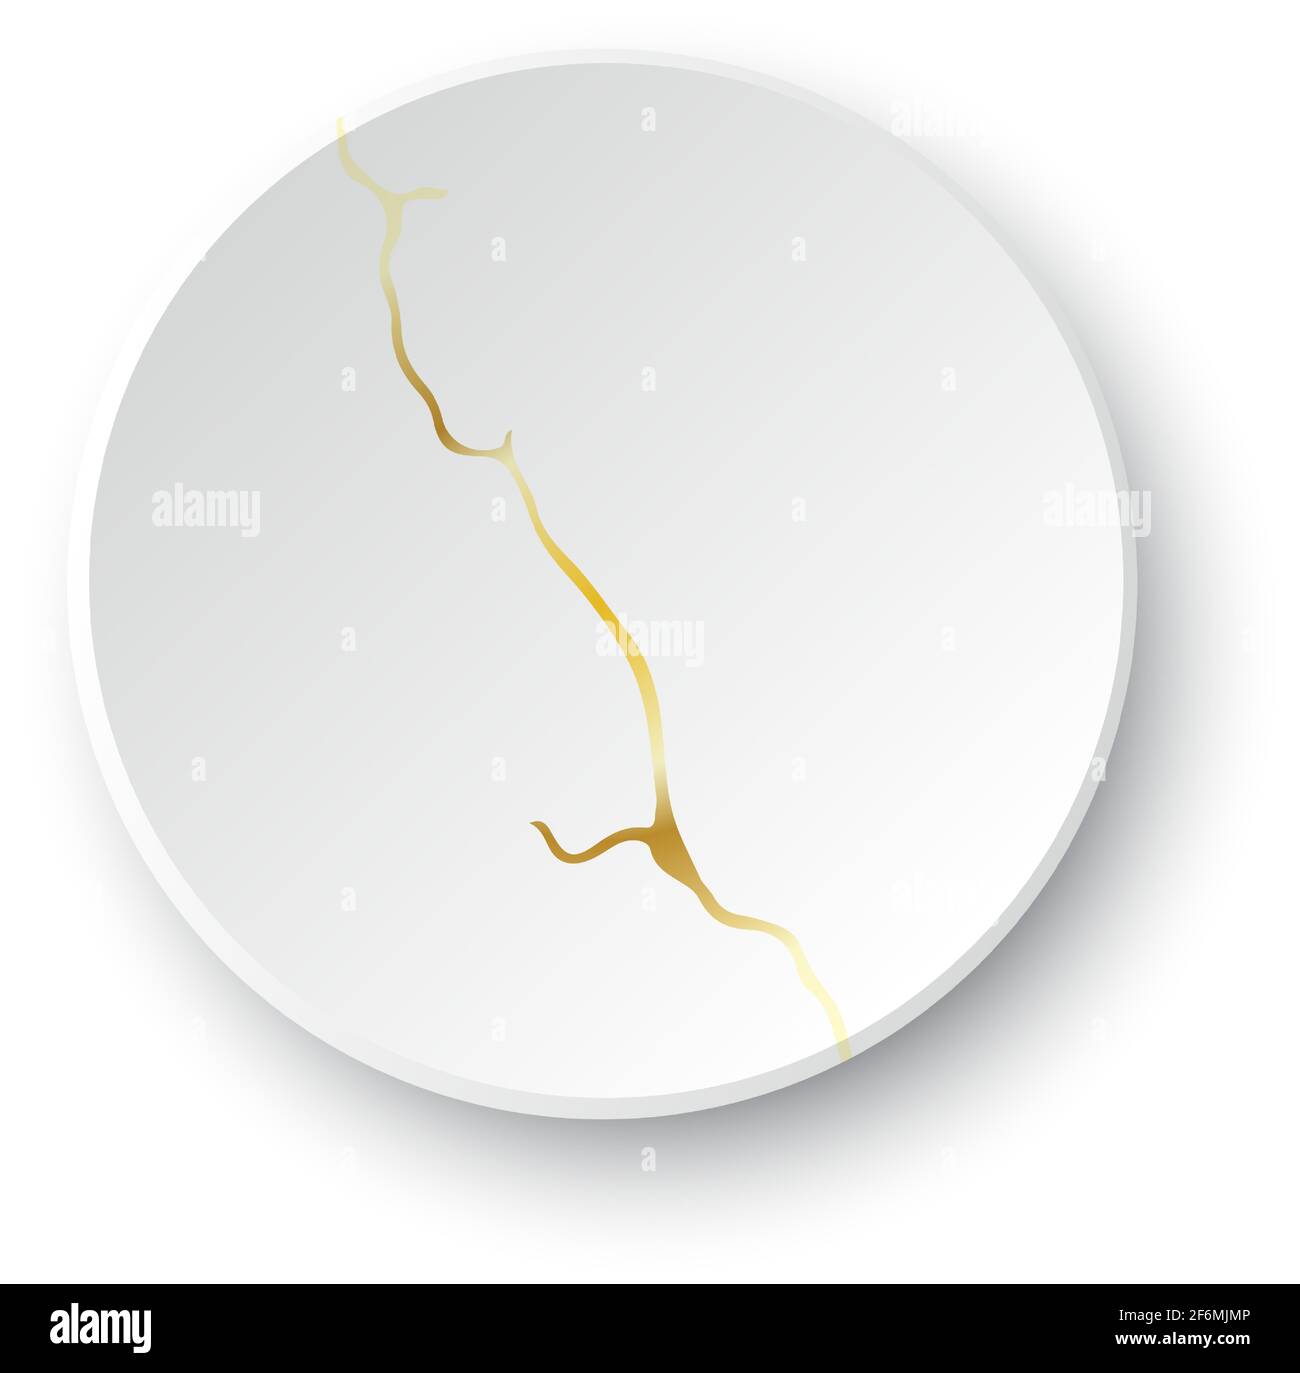 Gold Kintsugi crack. Broken and crack effect, craquelure and damaged texture. Vector illustrations can be used for kintsugi decorations, wall arts Stock Vector